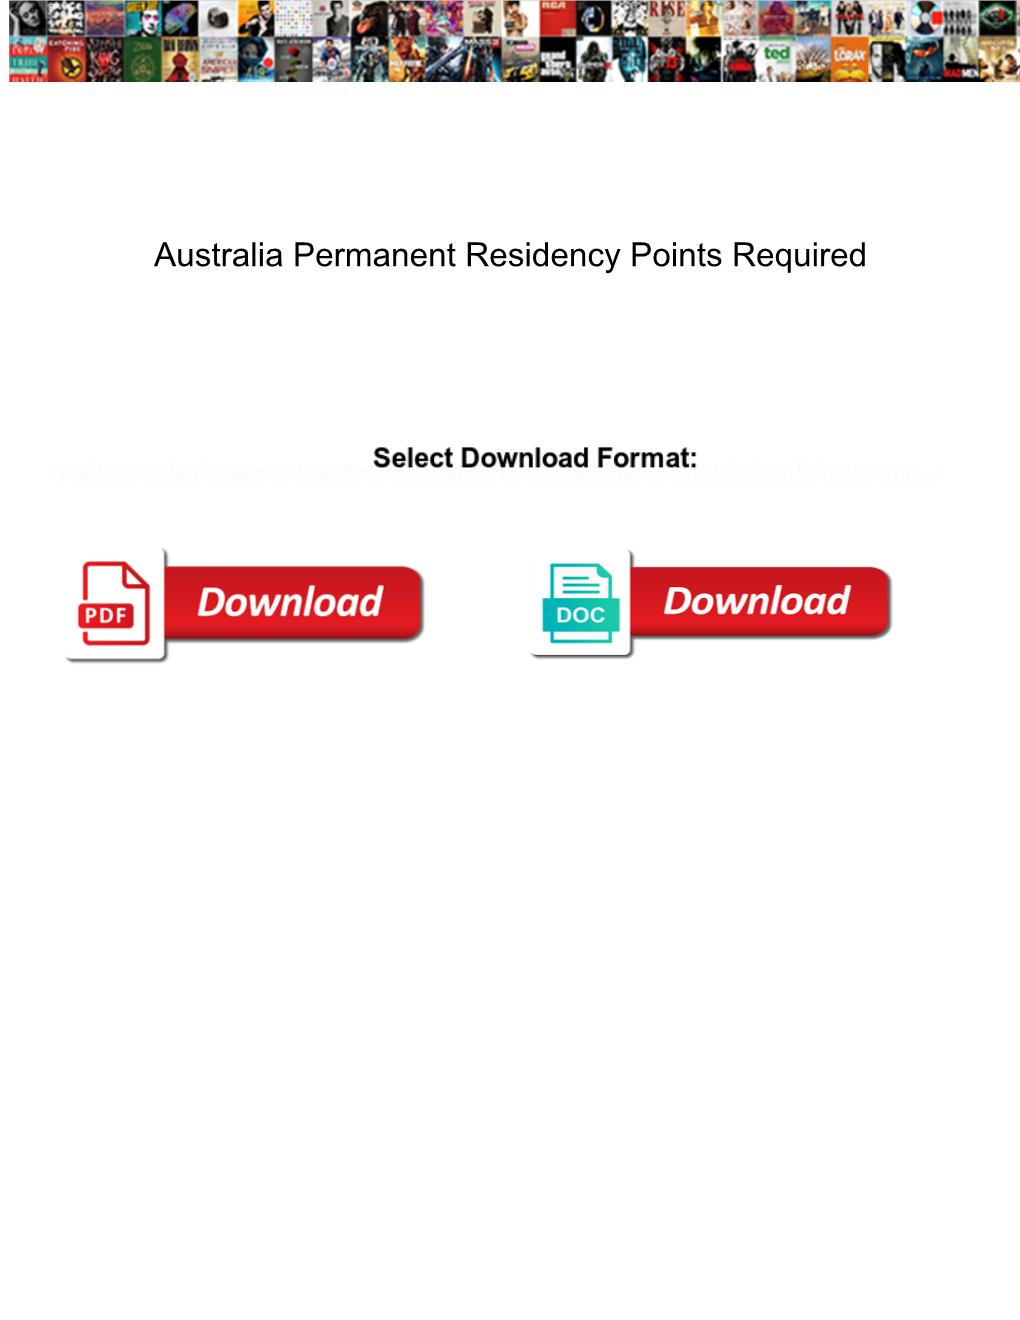 Australia Permanent Residency Points Required